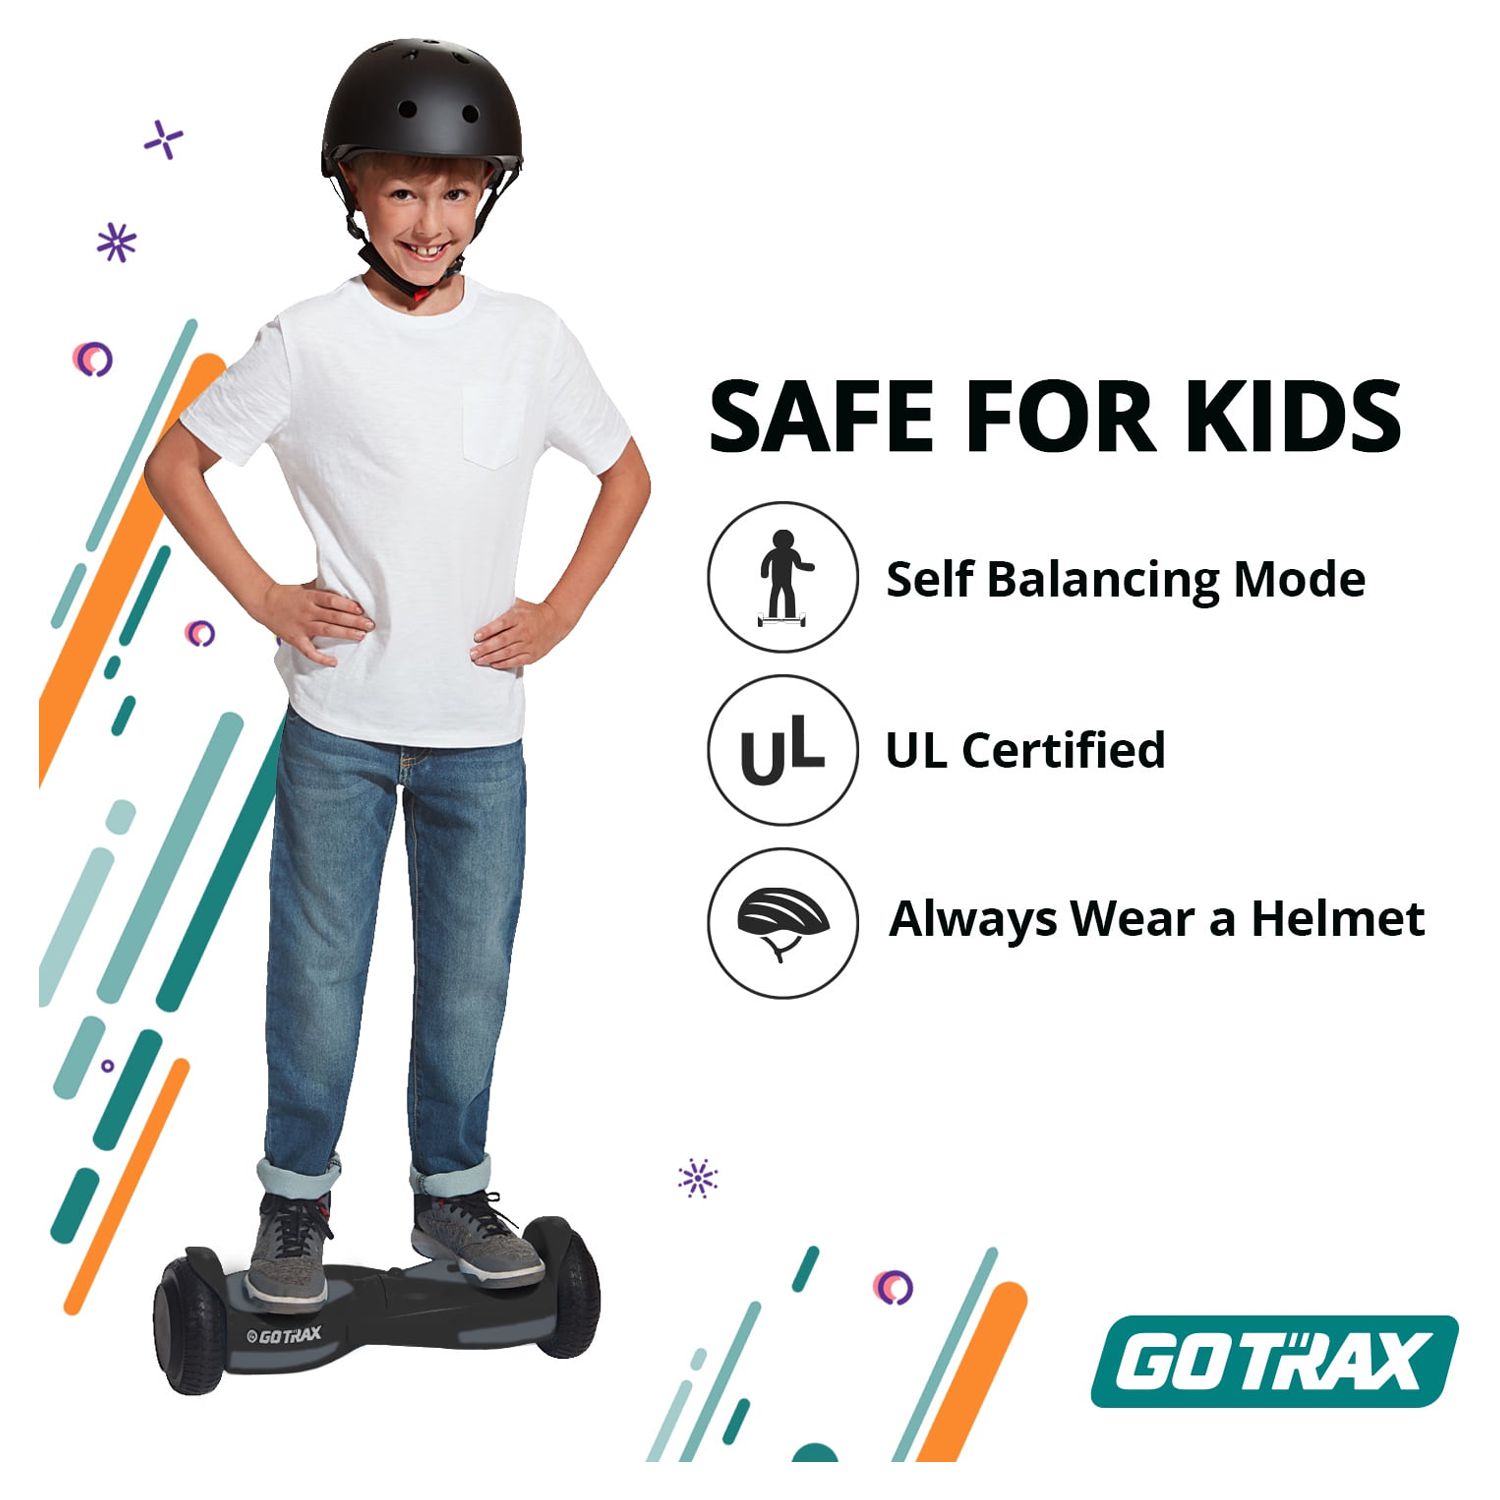 GOTRAX SRX Mini Hoverboard for Kids 6-12, 6.5" Wheels 150W Motor up to 5 mph Hover Boards Black - image 4 of 12